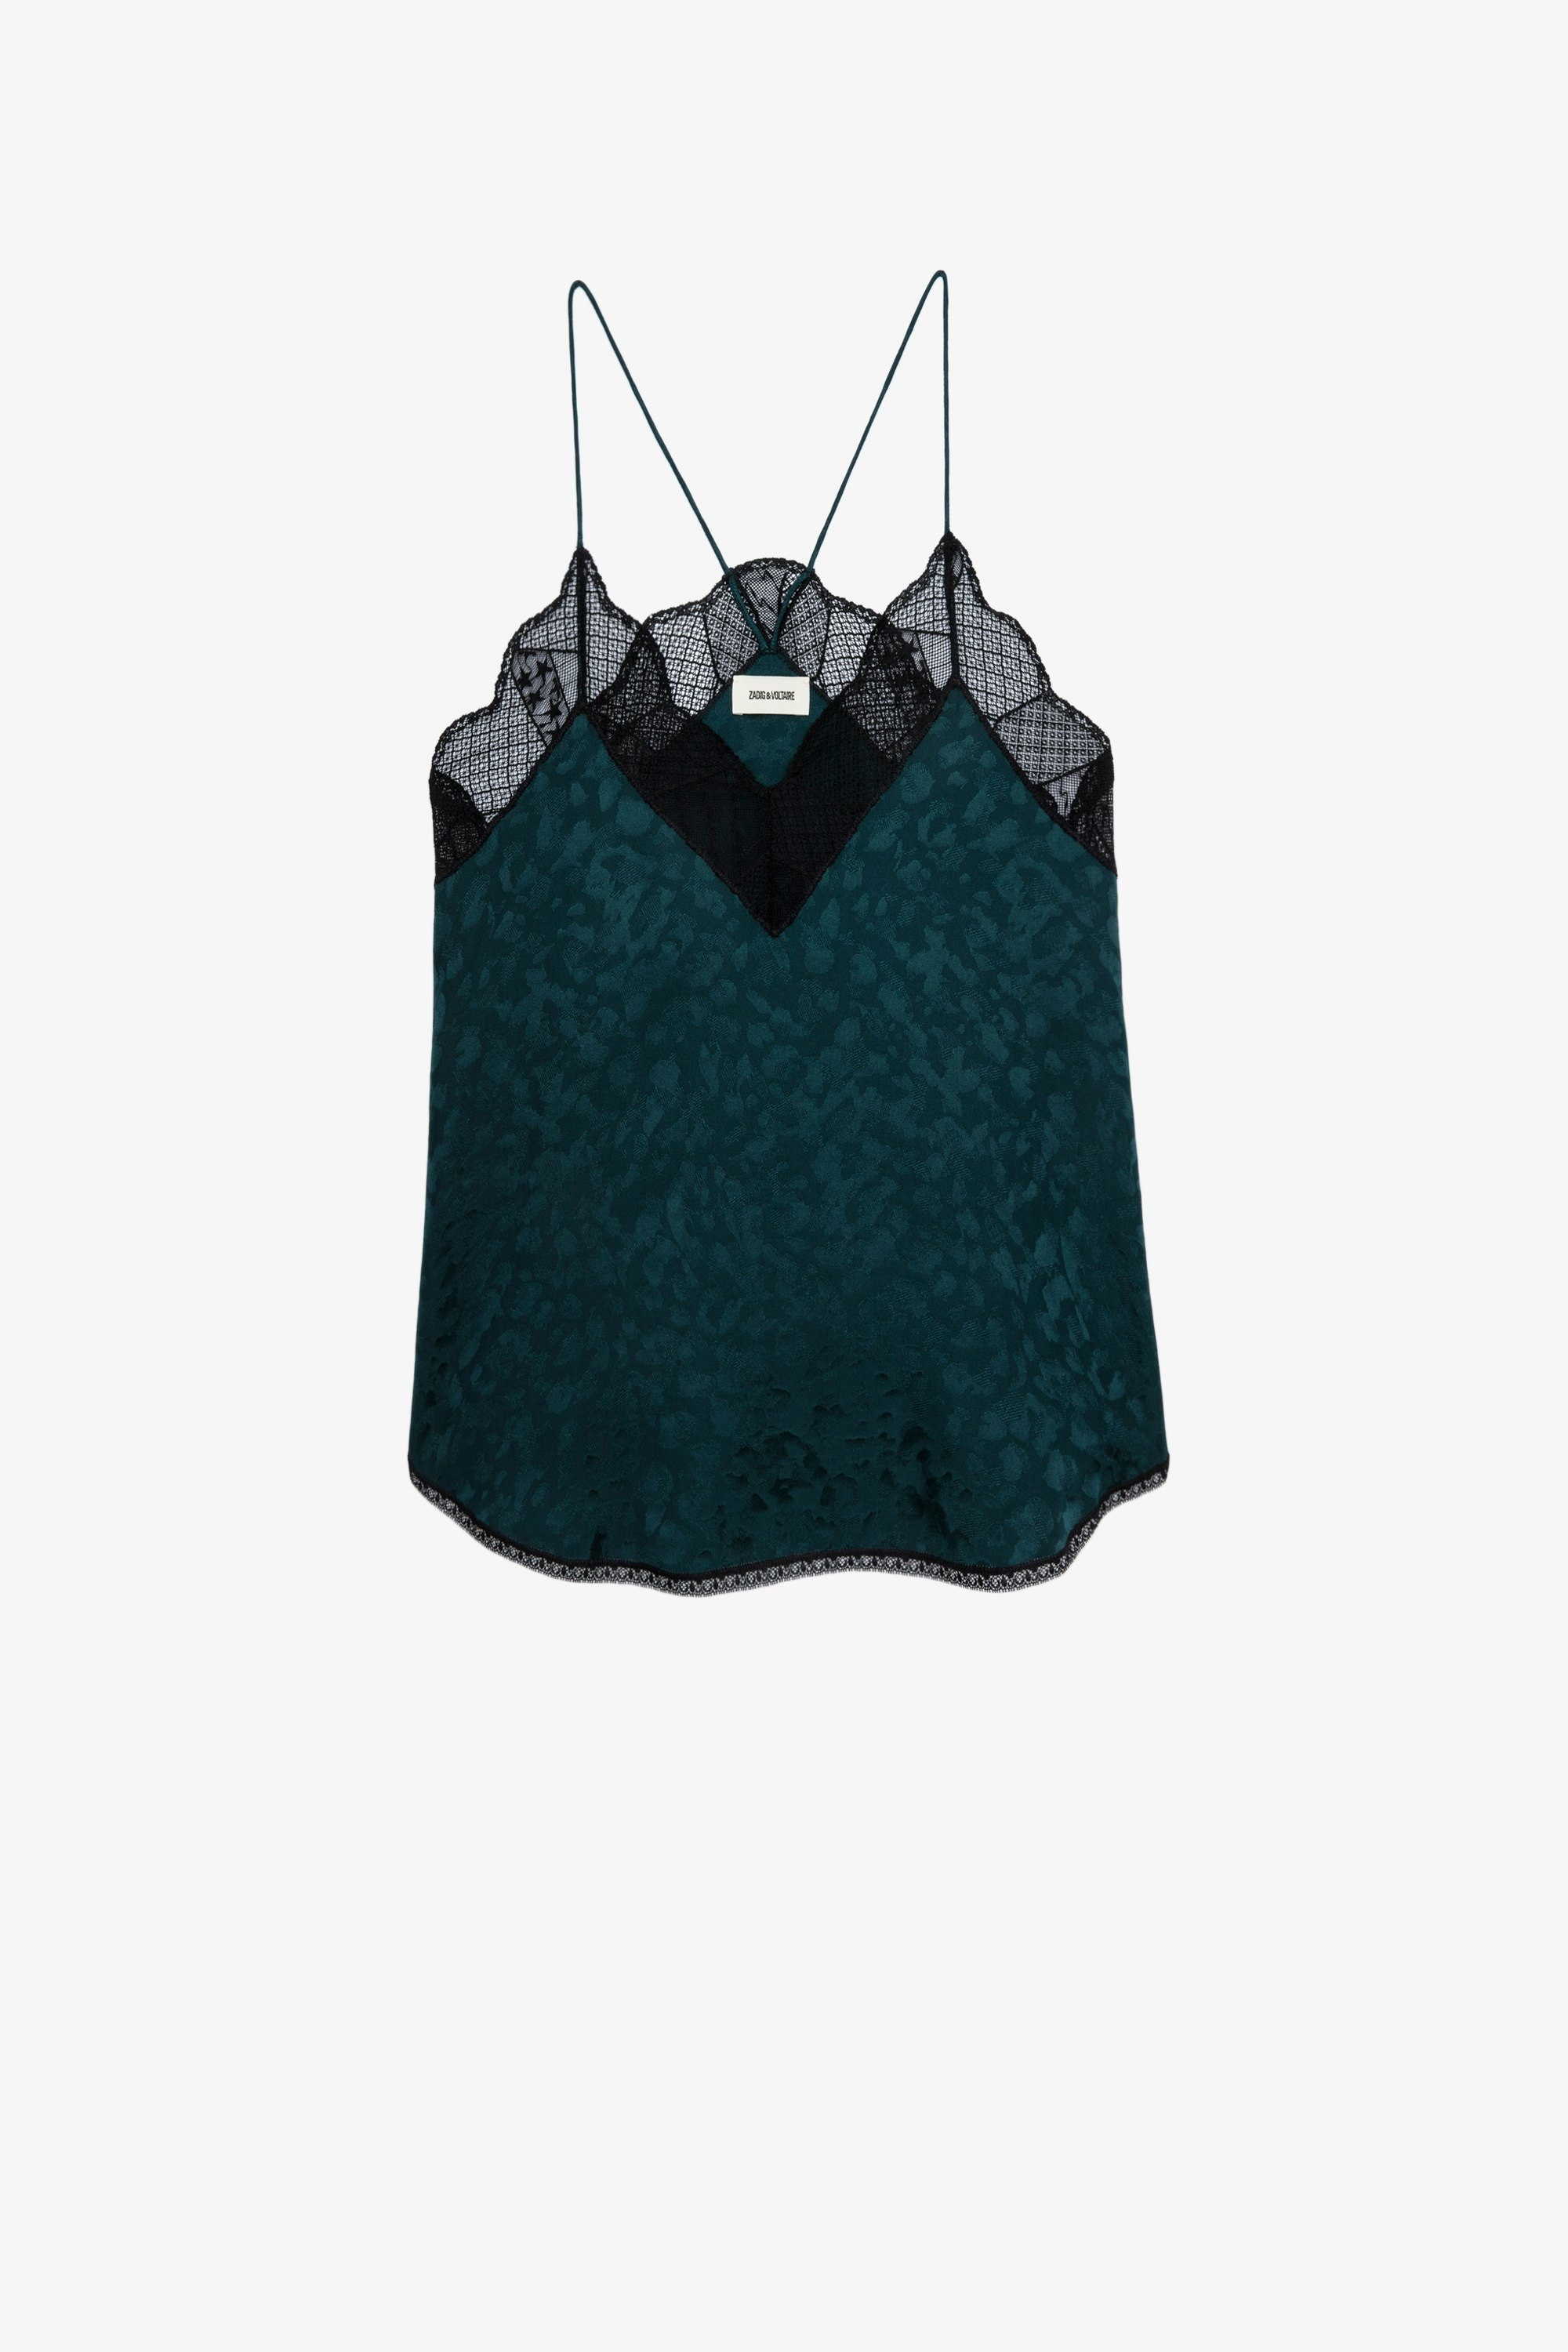 Christy Jac Leo シルク キャミソール Green silk camisole with leopard-print jacquard and lace trim